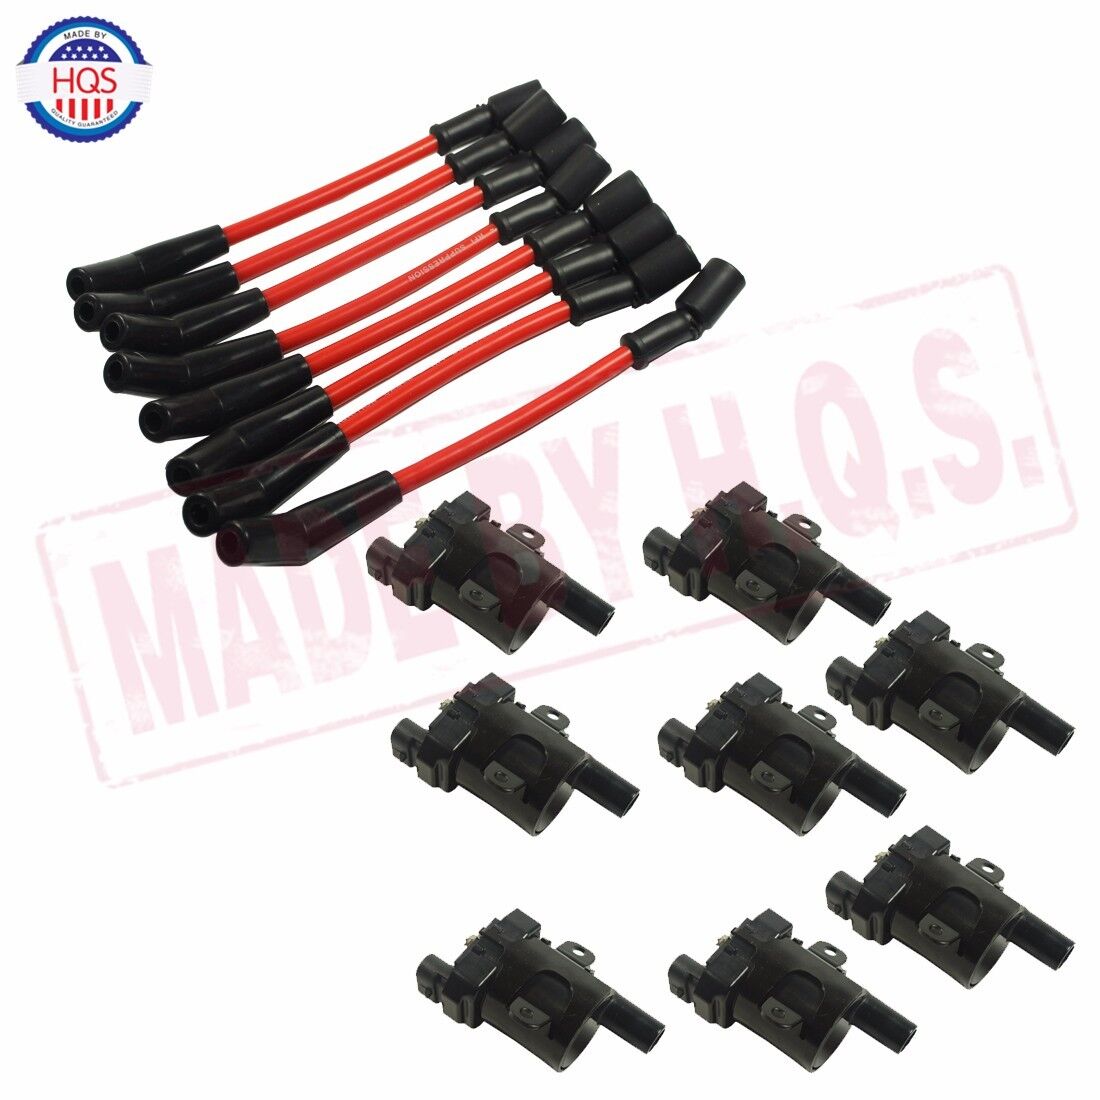 Set of 8 Ignition Coils Kit & 8 Pcs Spark Plug Ignition Wires Set For Chevy NEW